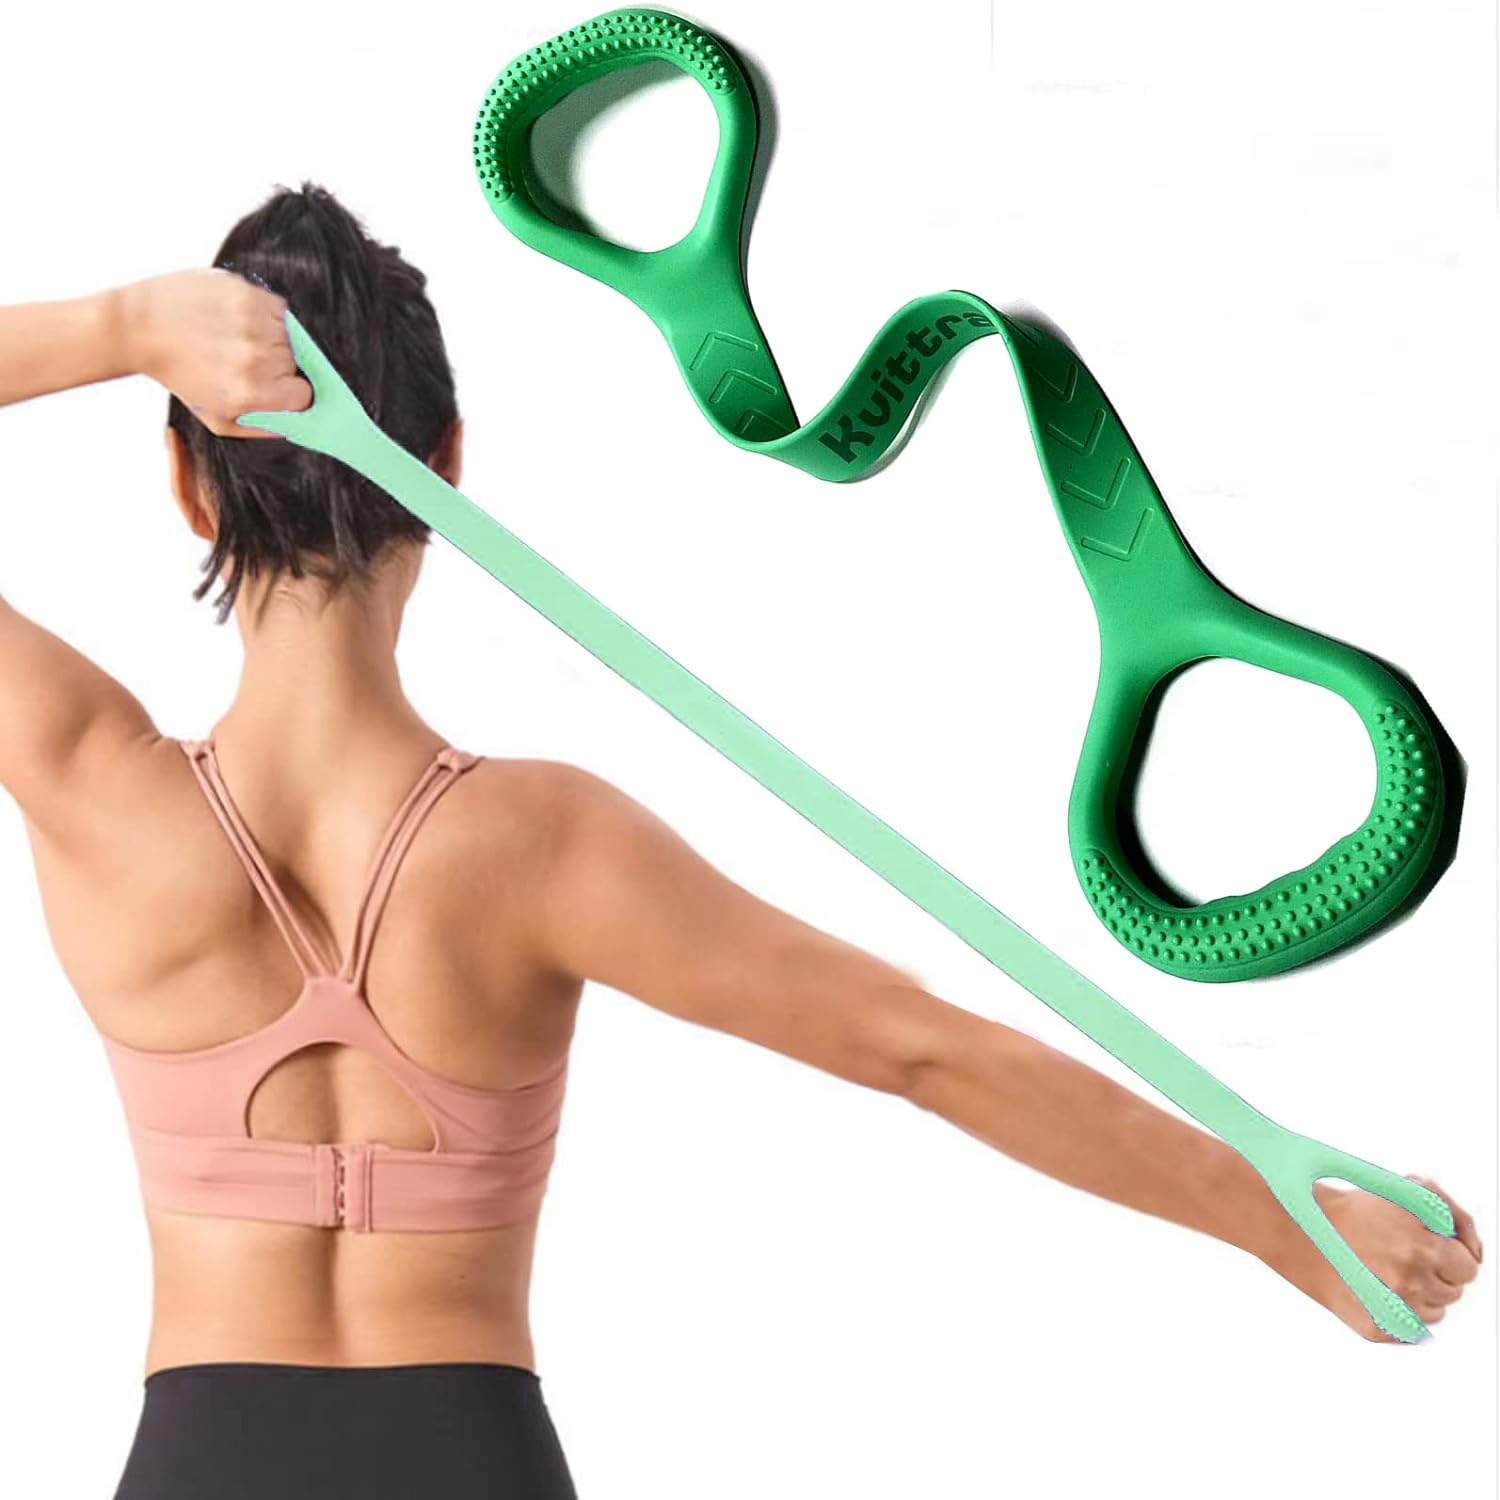 Kvittra Figure 8 Resistance Band, Arm Back Shoulder Exercise Elastic Rope Stretch Fitness Band, Foot, Leg, Hand Stretcher, Arm Exerciser for Yoga Pilates Stretching Physical Therapy, Home Gym Workout